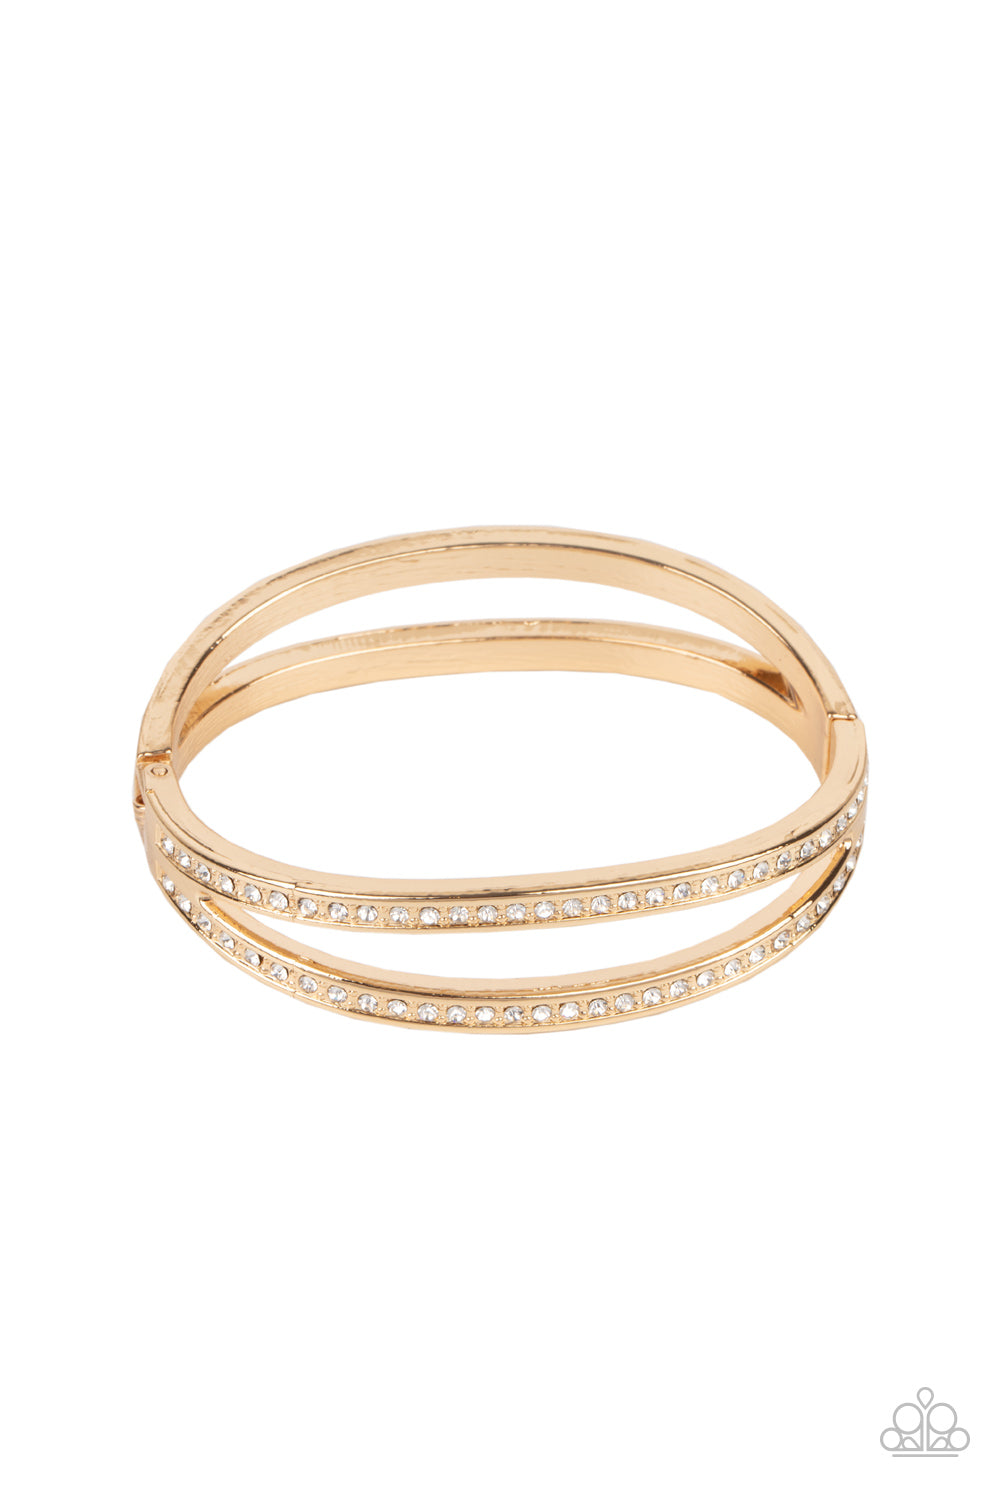 A Show of FIERCE - Gold Fashion Bracelet - Paparazzi Accessories - Encrusted in glassy white rhinestones, an oval gold frame attaches to a matching shiny frame, creating a timelessly layered bangle-like cuff around the wrist. Features a hinged closure. Sold as one individual bracelet.